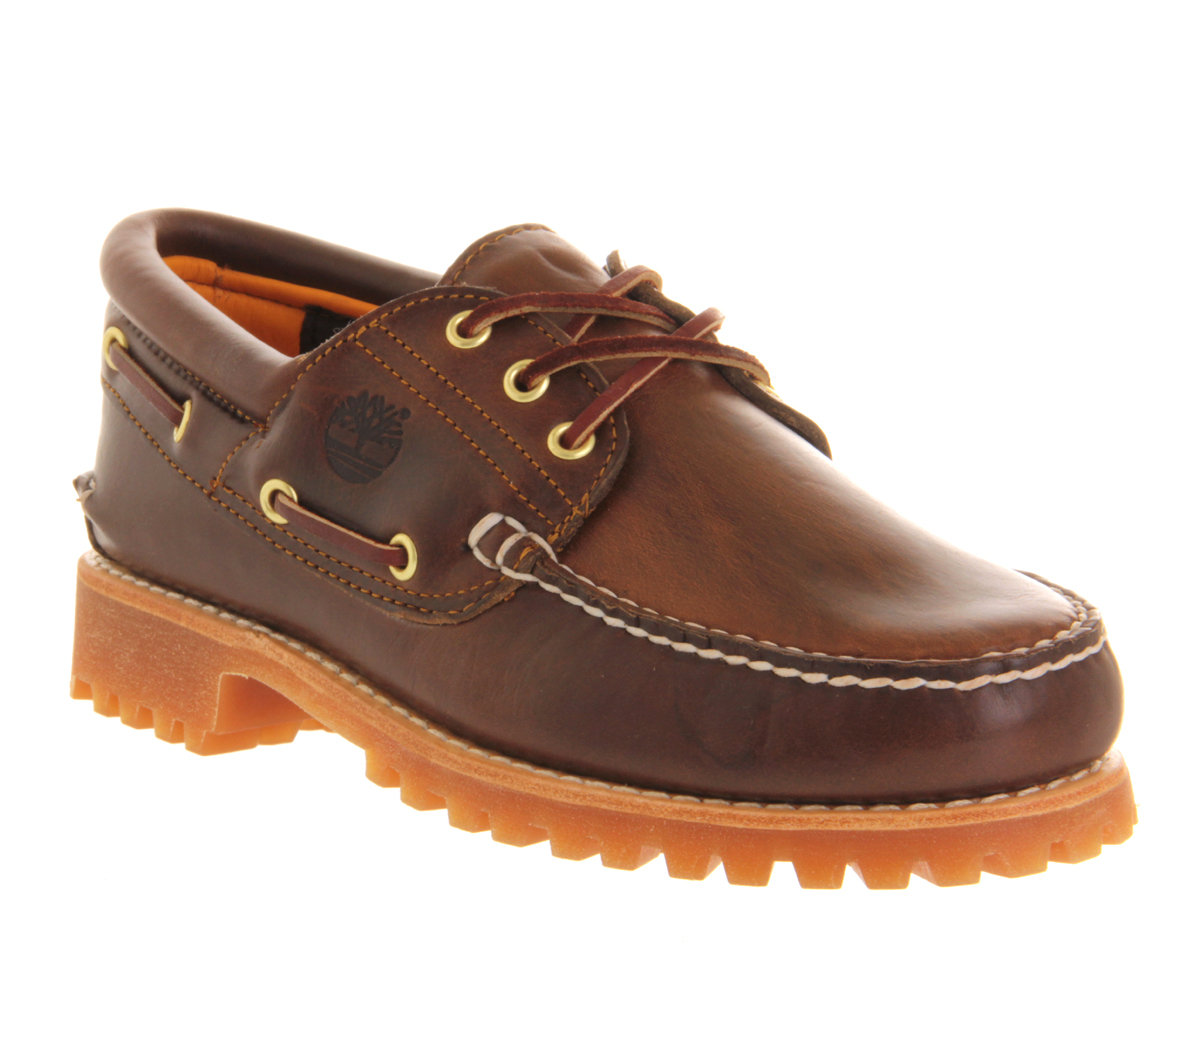 Timberland 3 Eye Classic Lug in Brown for Men - Lyst